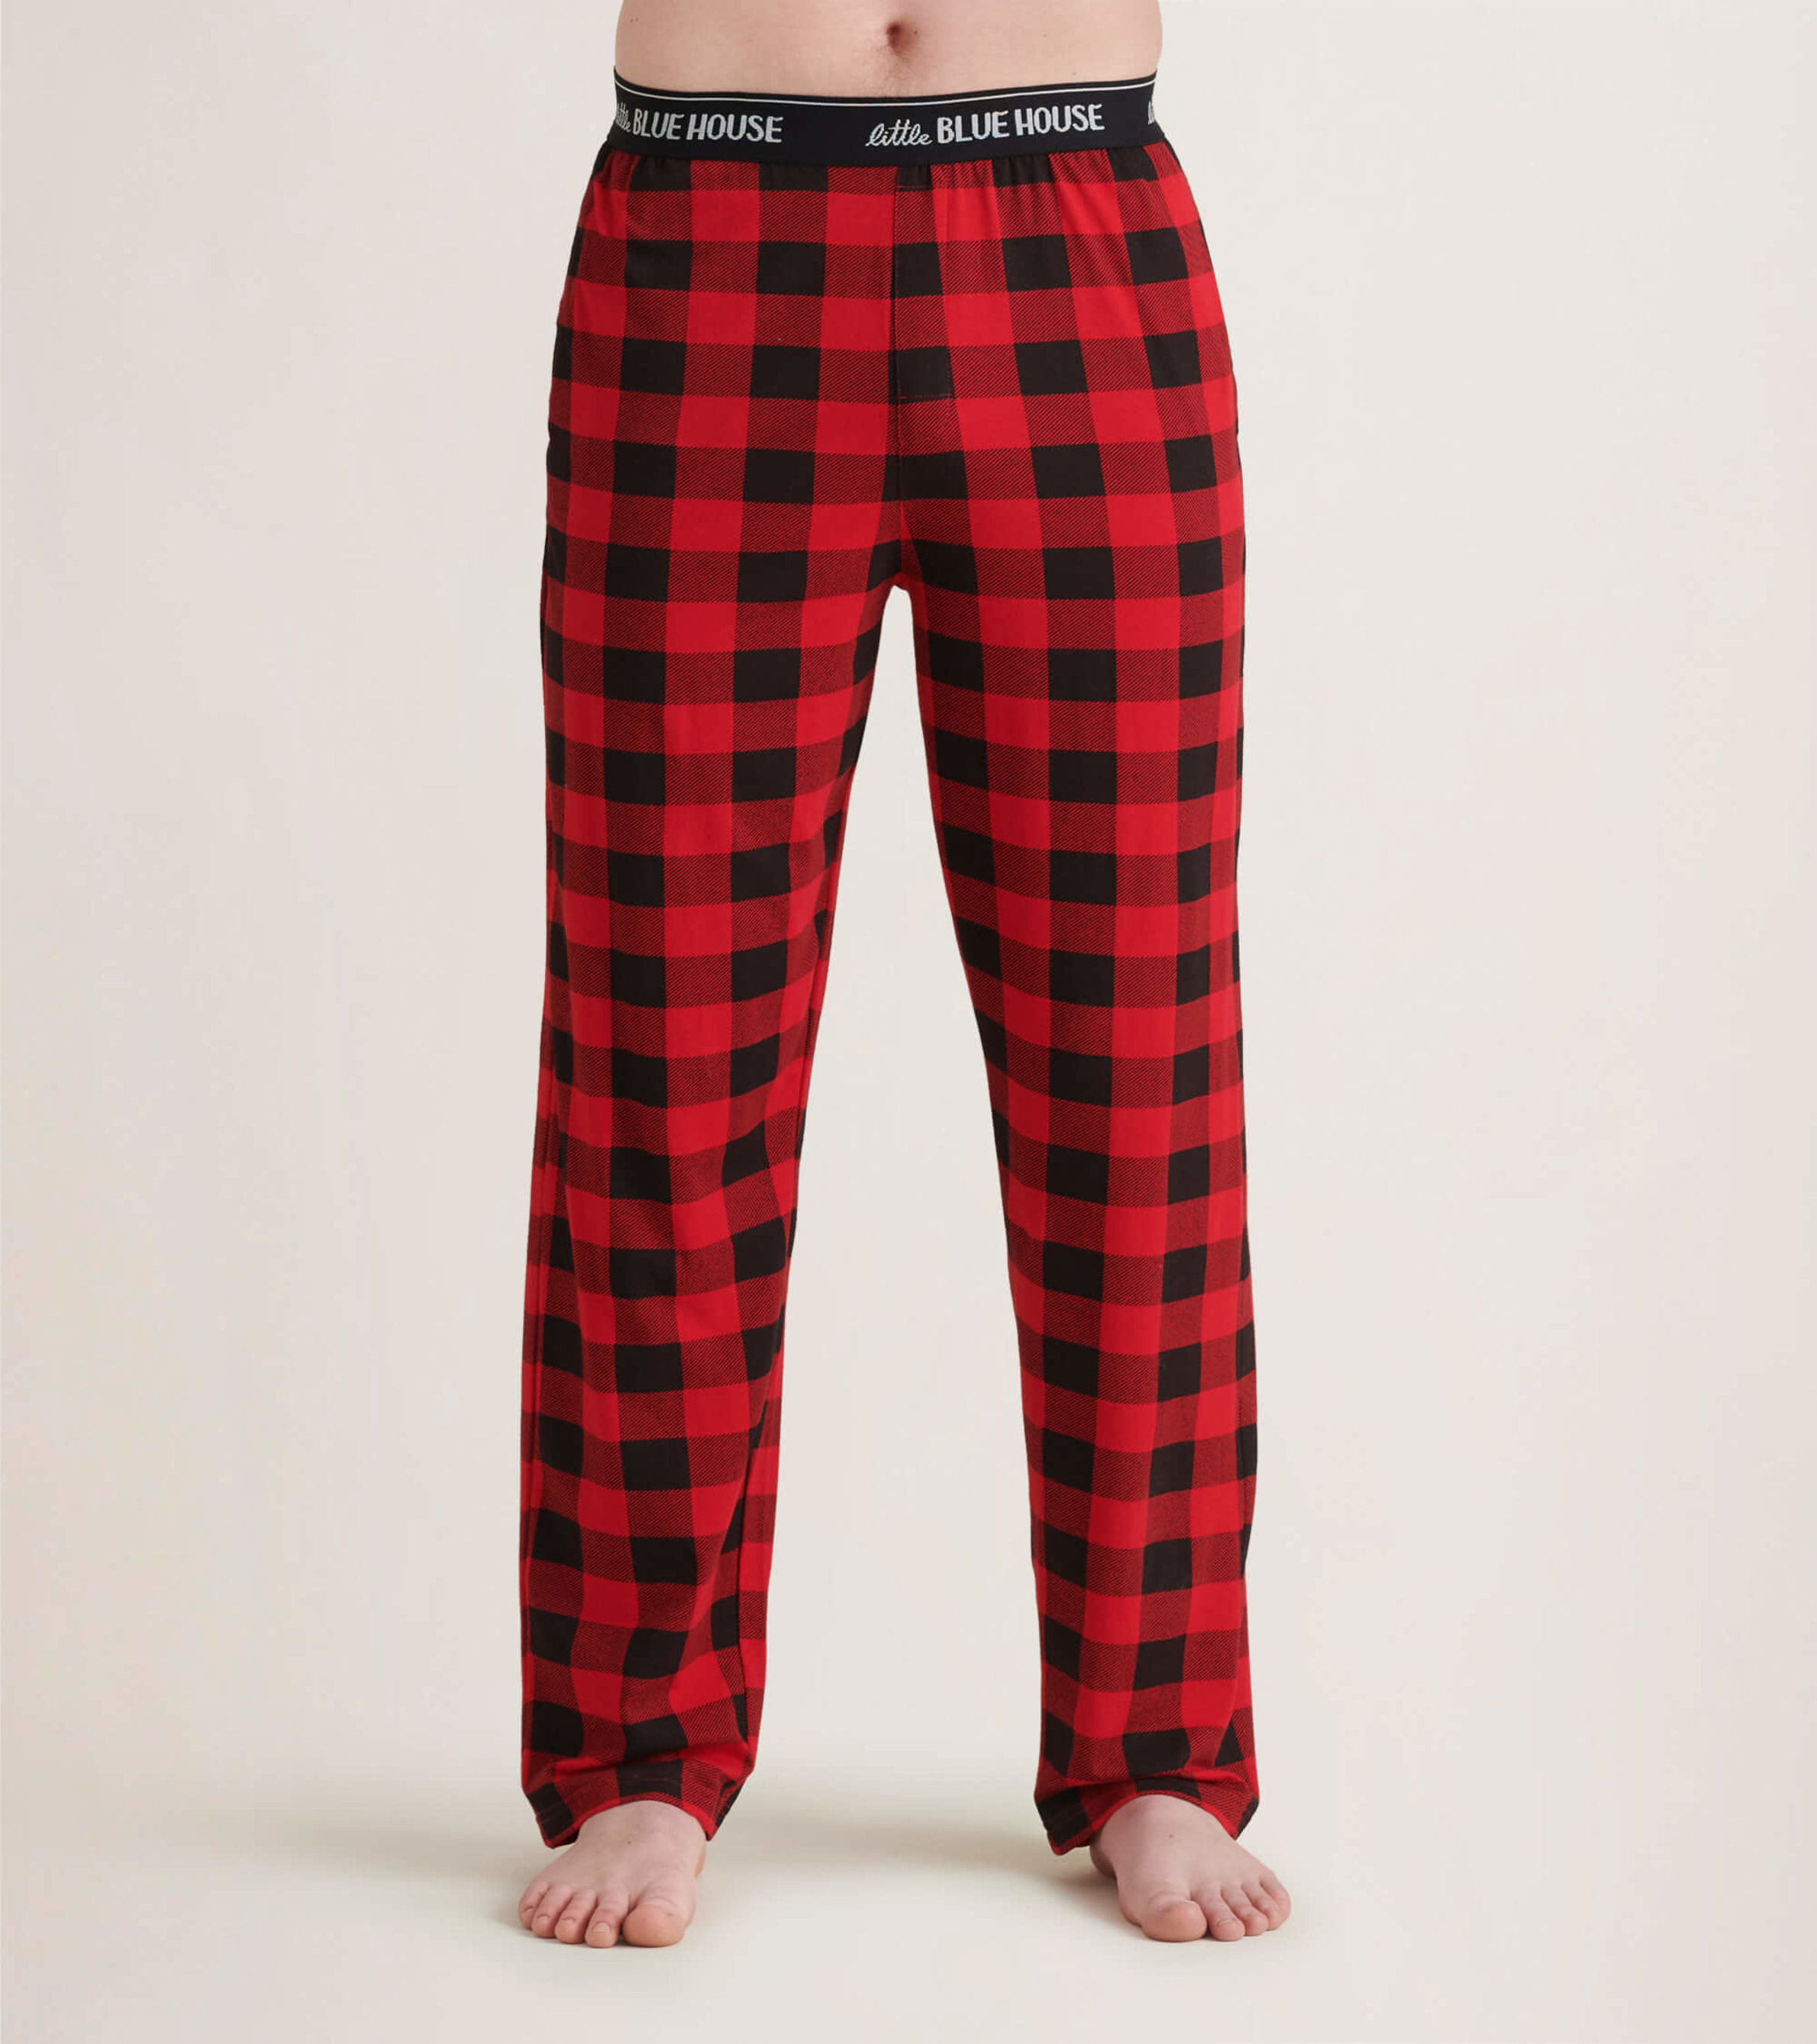 Buy Pajama Pants For Women 3 For 100 Cotton online | Lazada.com.ph